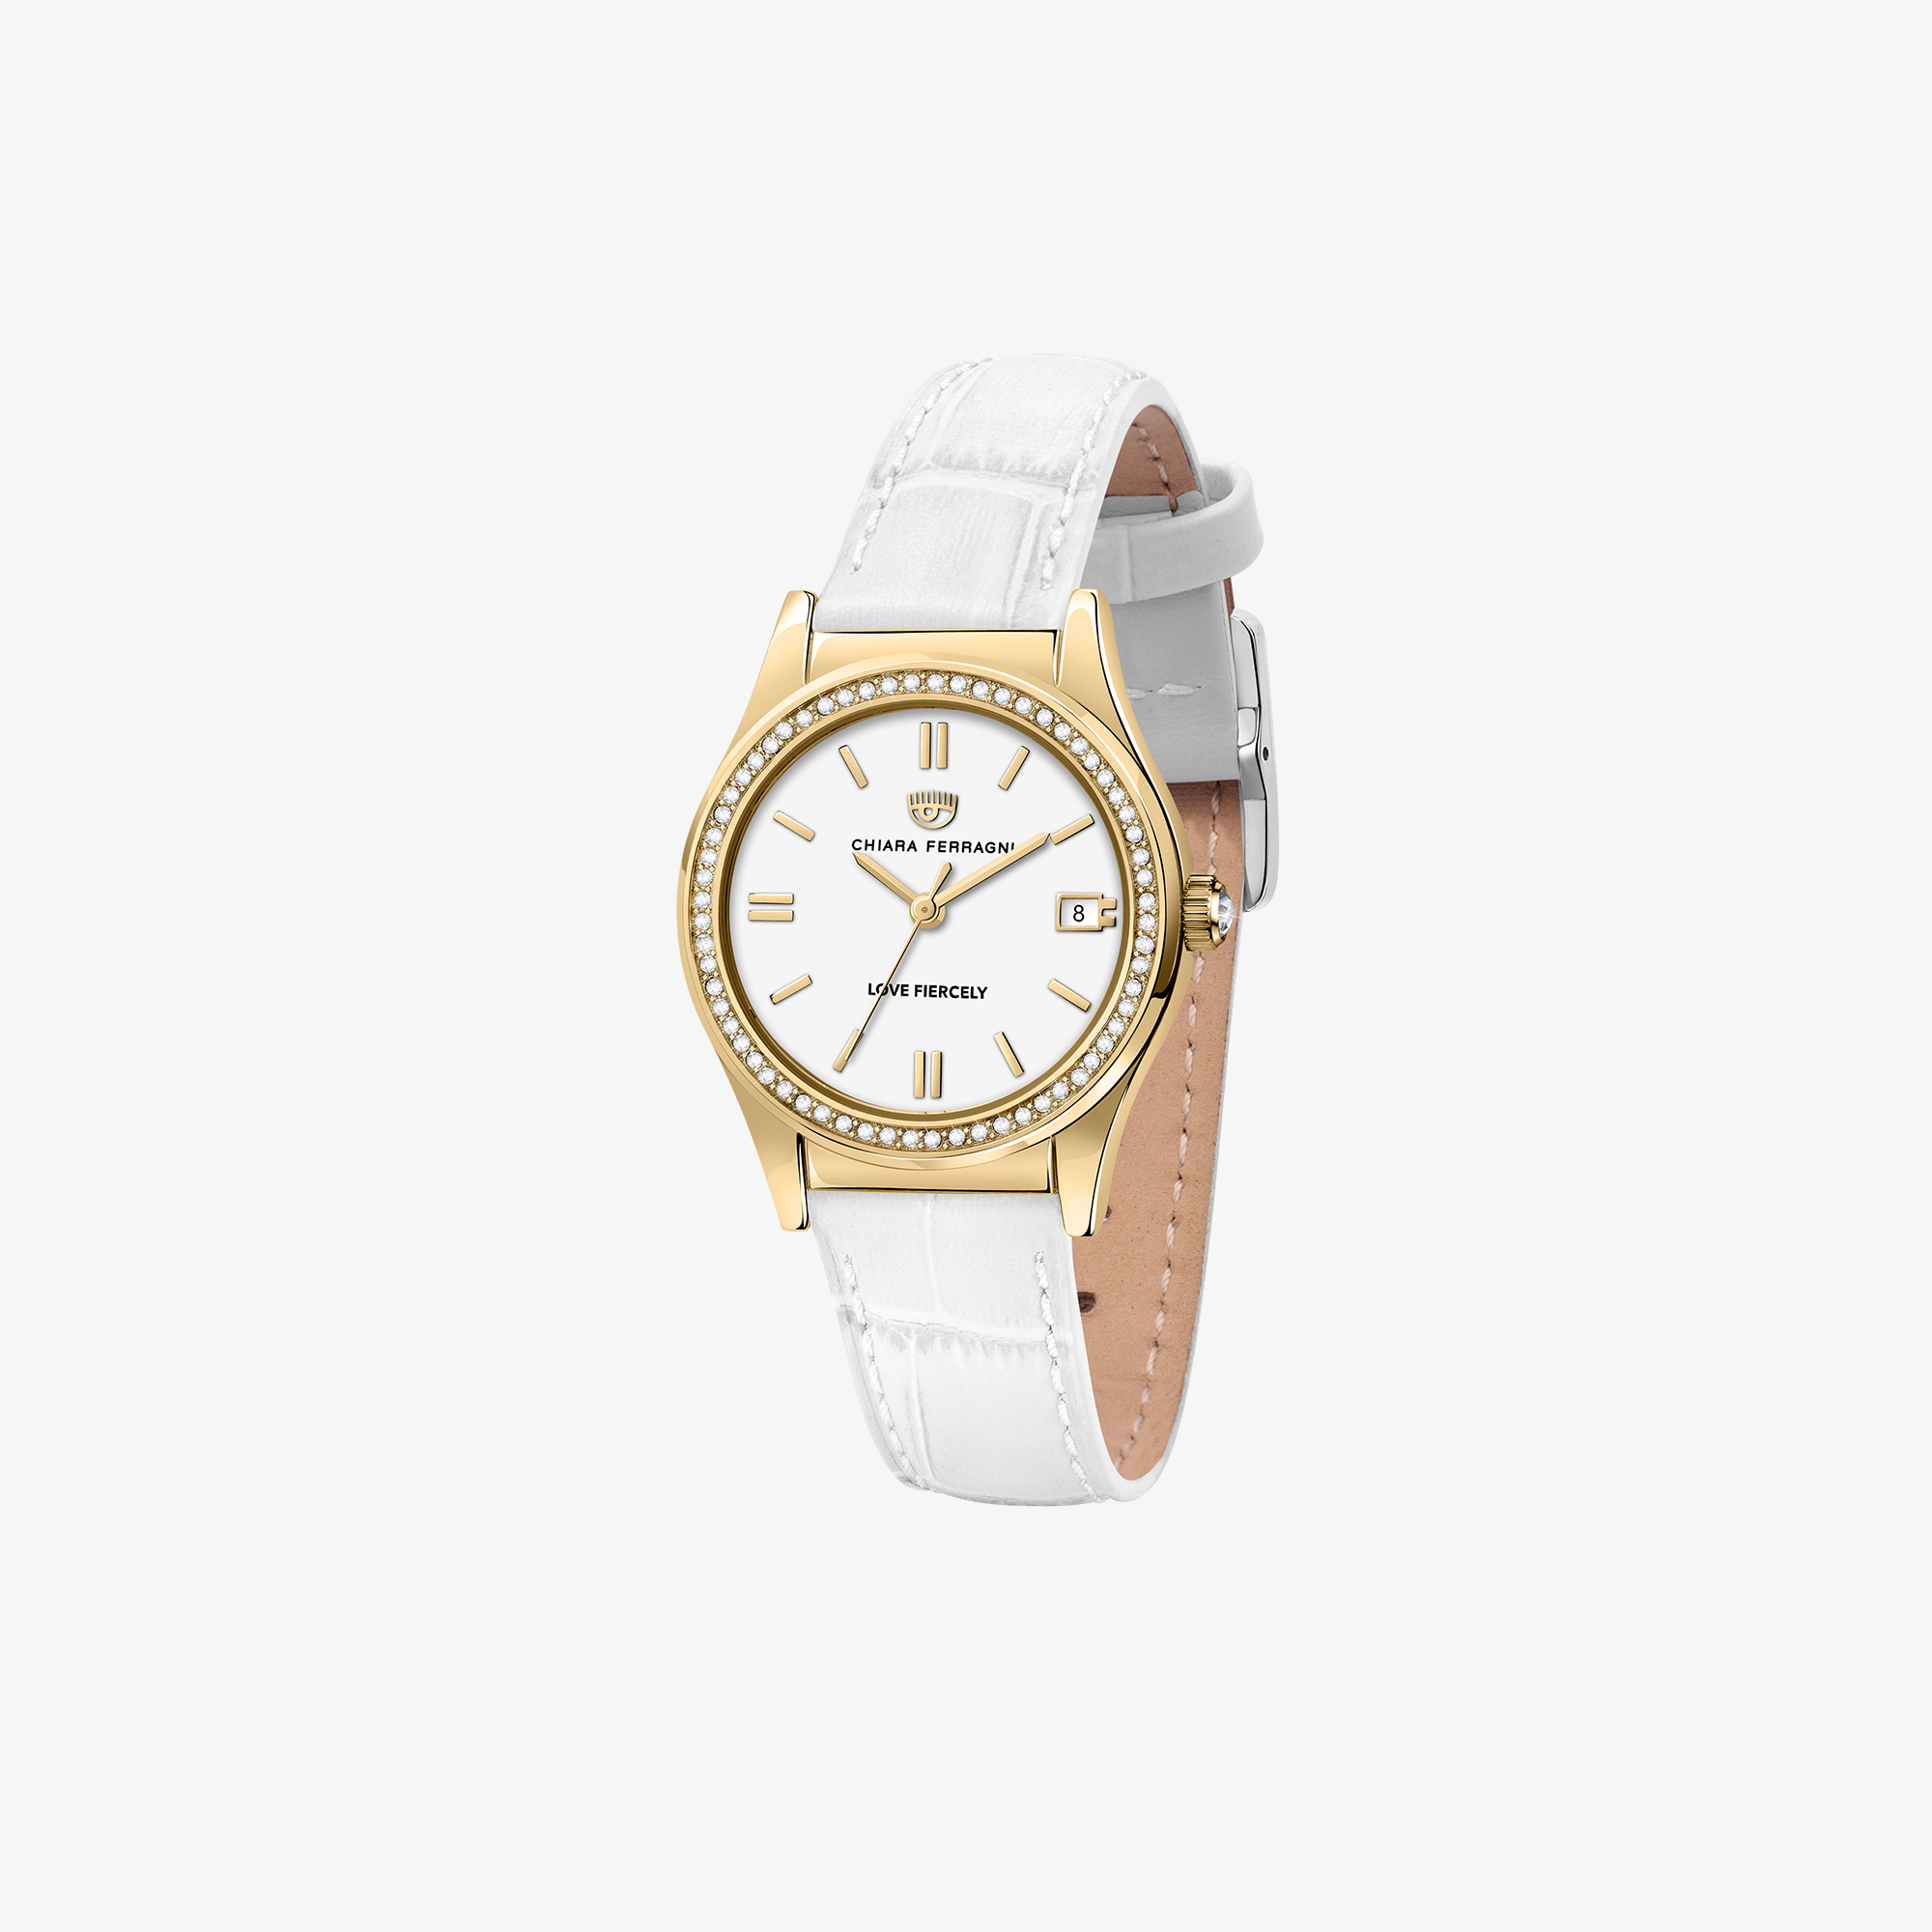 CHIARA FERRAGNI CONTEPORARY WATCH WITH WHITE LEATHER STRAP